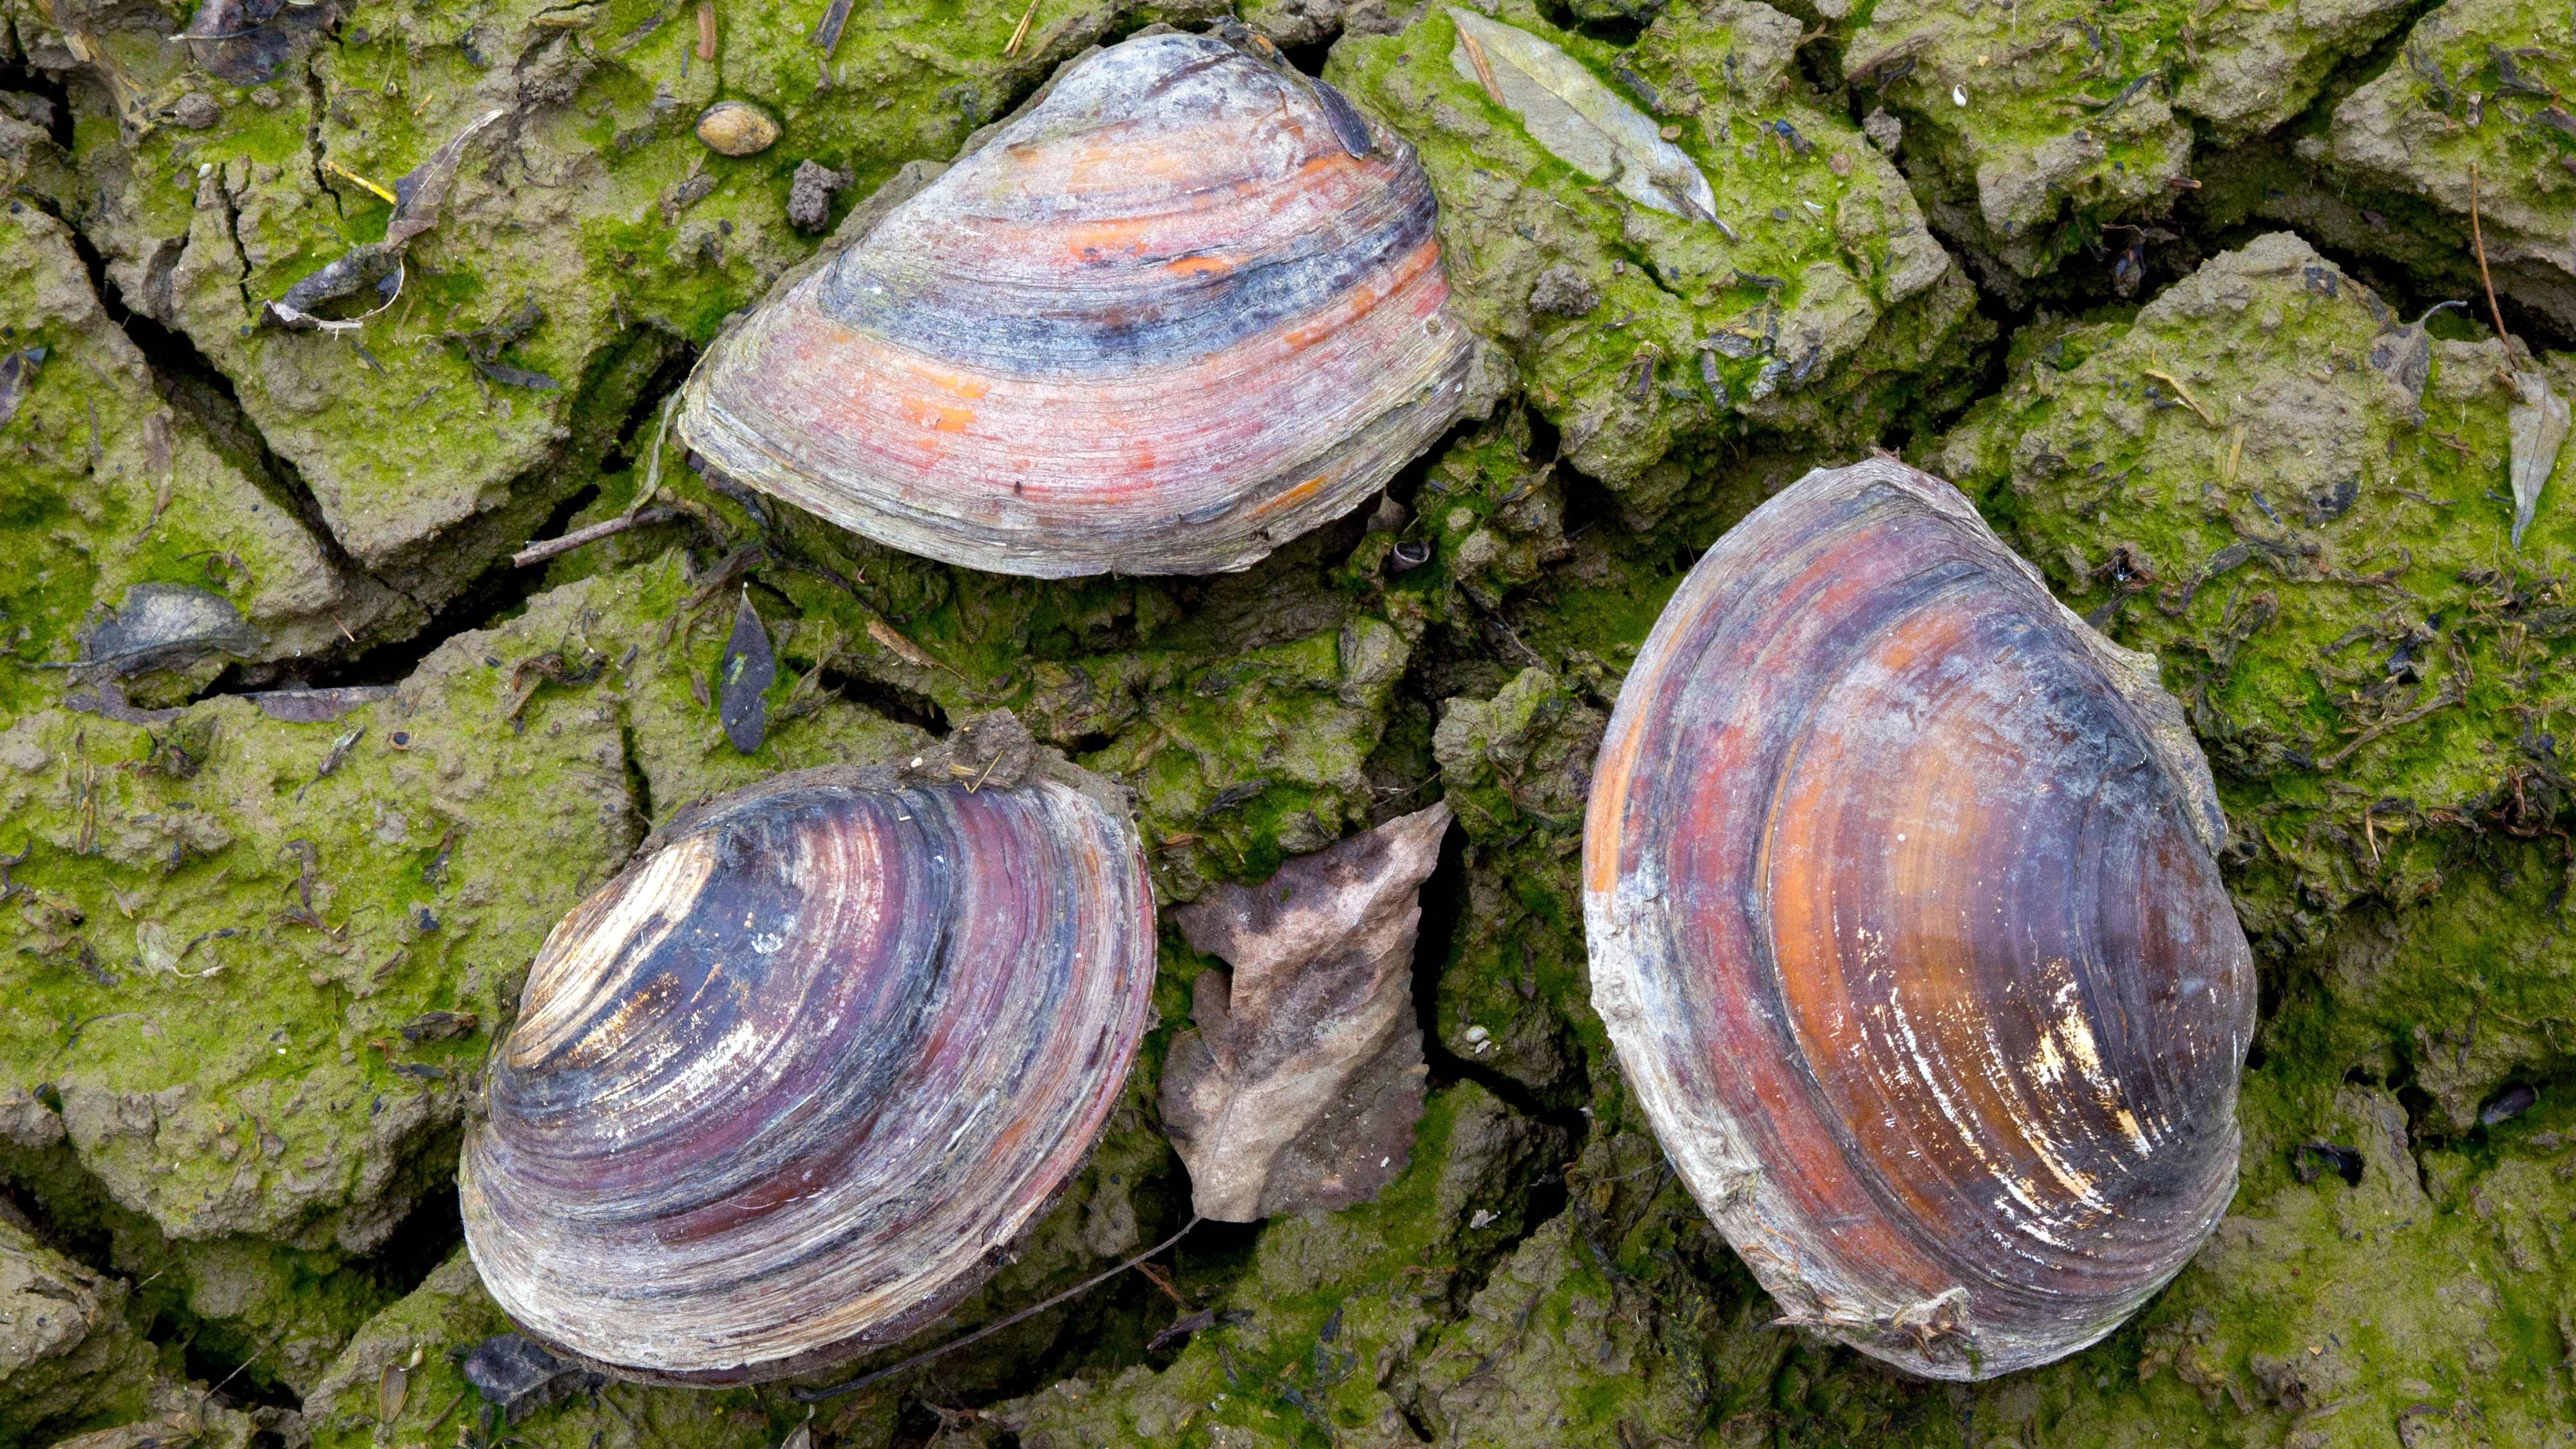 Three freshwater mussels on the ground.